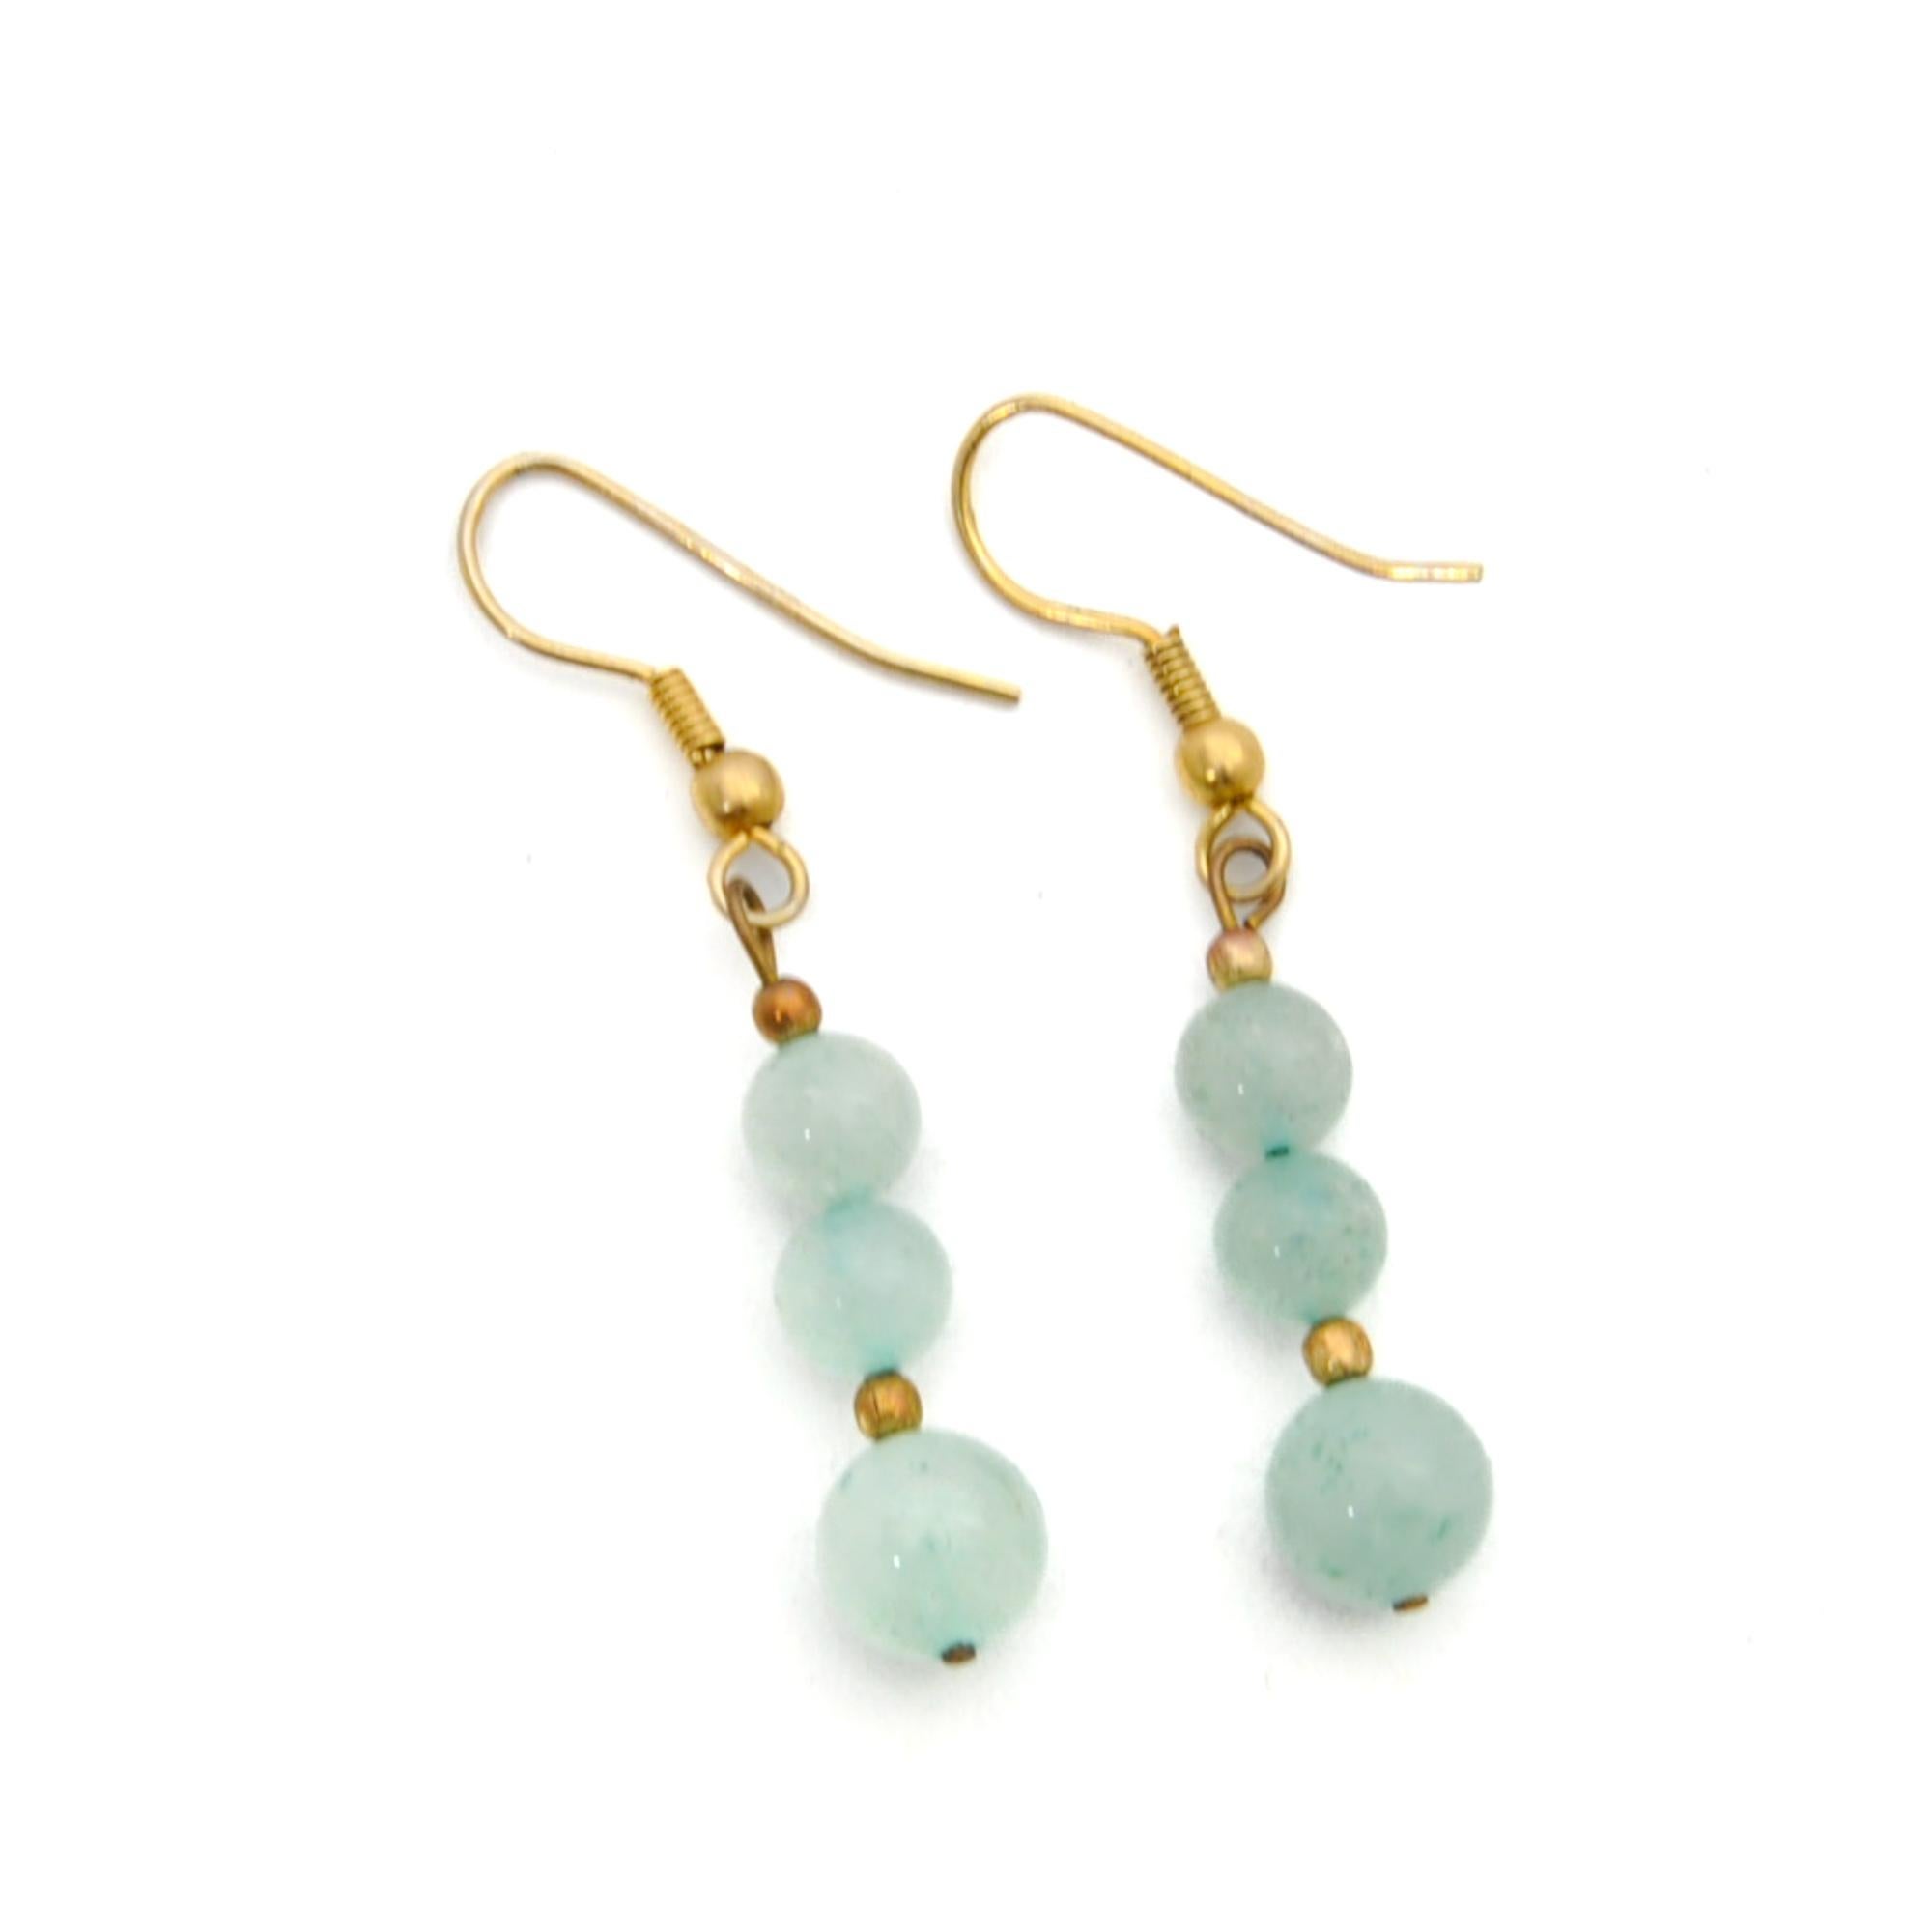 A beautiful pair of polished natural green silky glow aventurine bead earrings. Aventurine is an eye-catching crystal that is adored by many for its beautiful shiny appearance. The presence of the mineral fuchsite gives aventurine its unique green